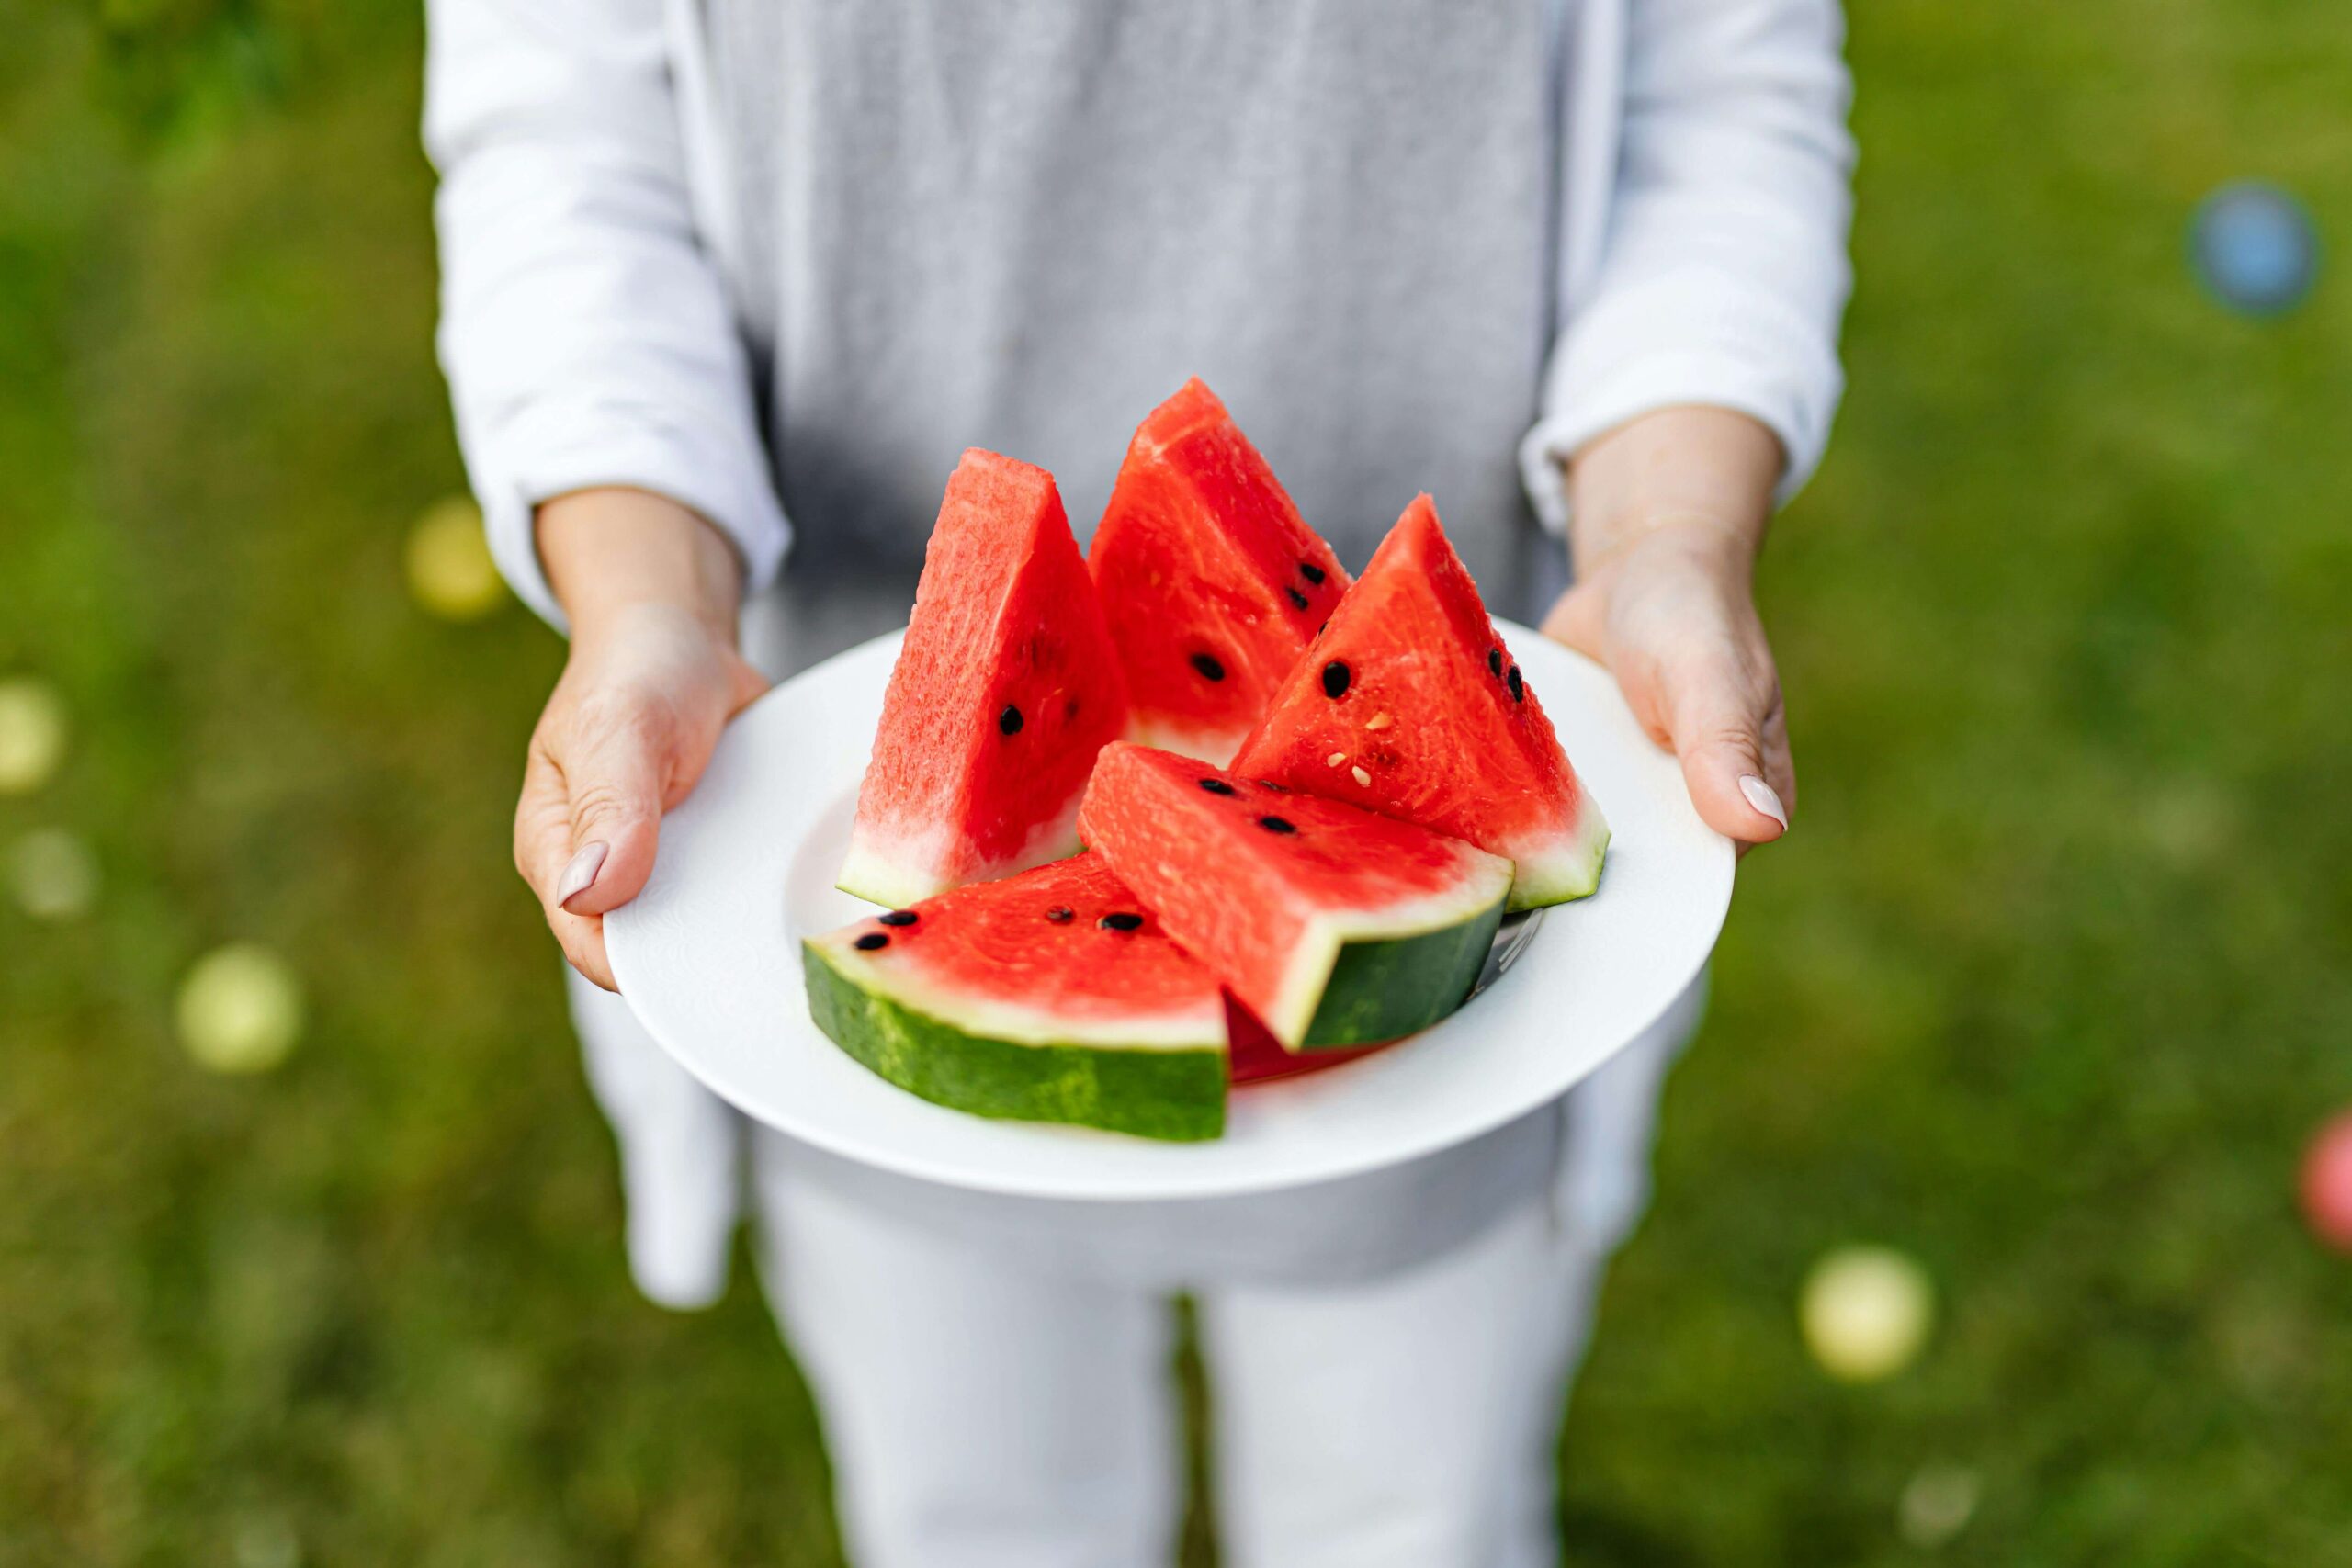 Benefits of Watermelon for Your Health